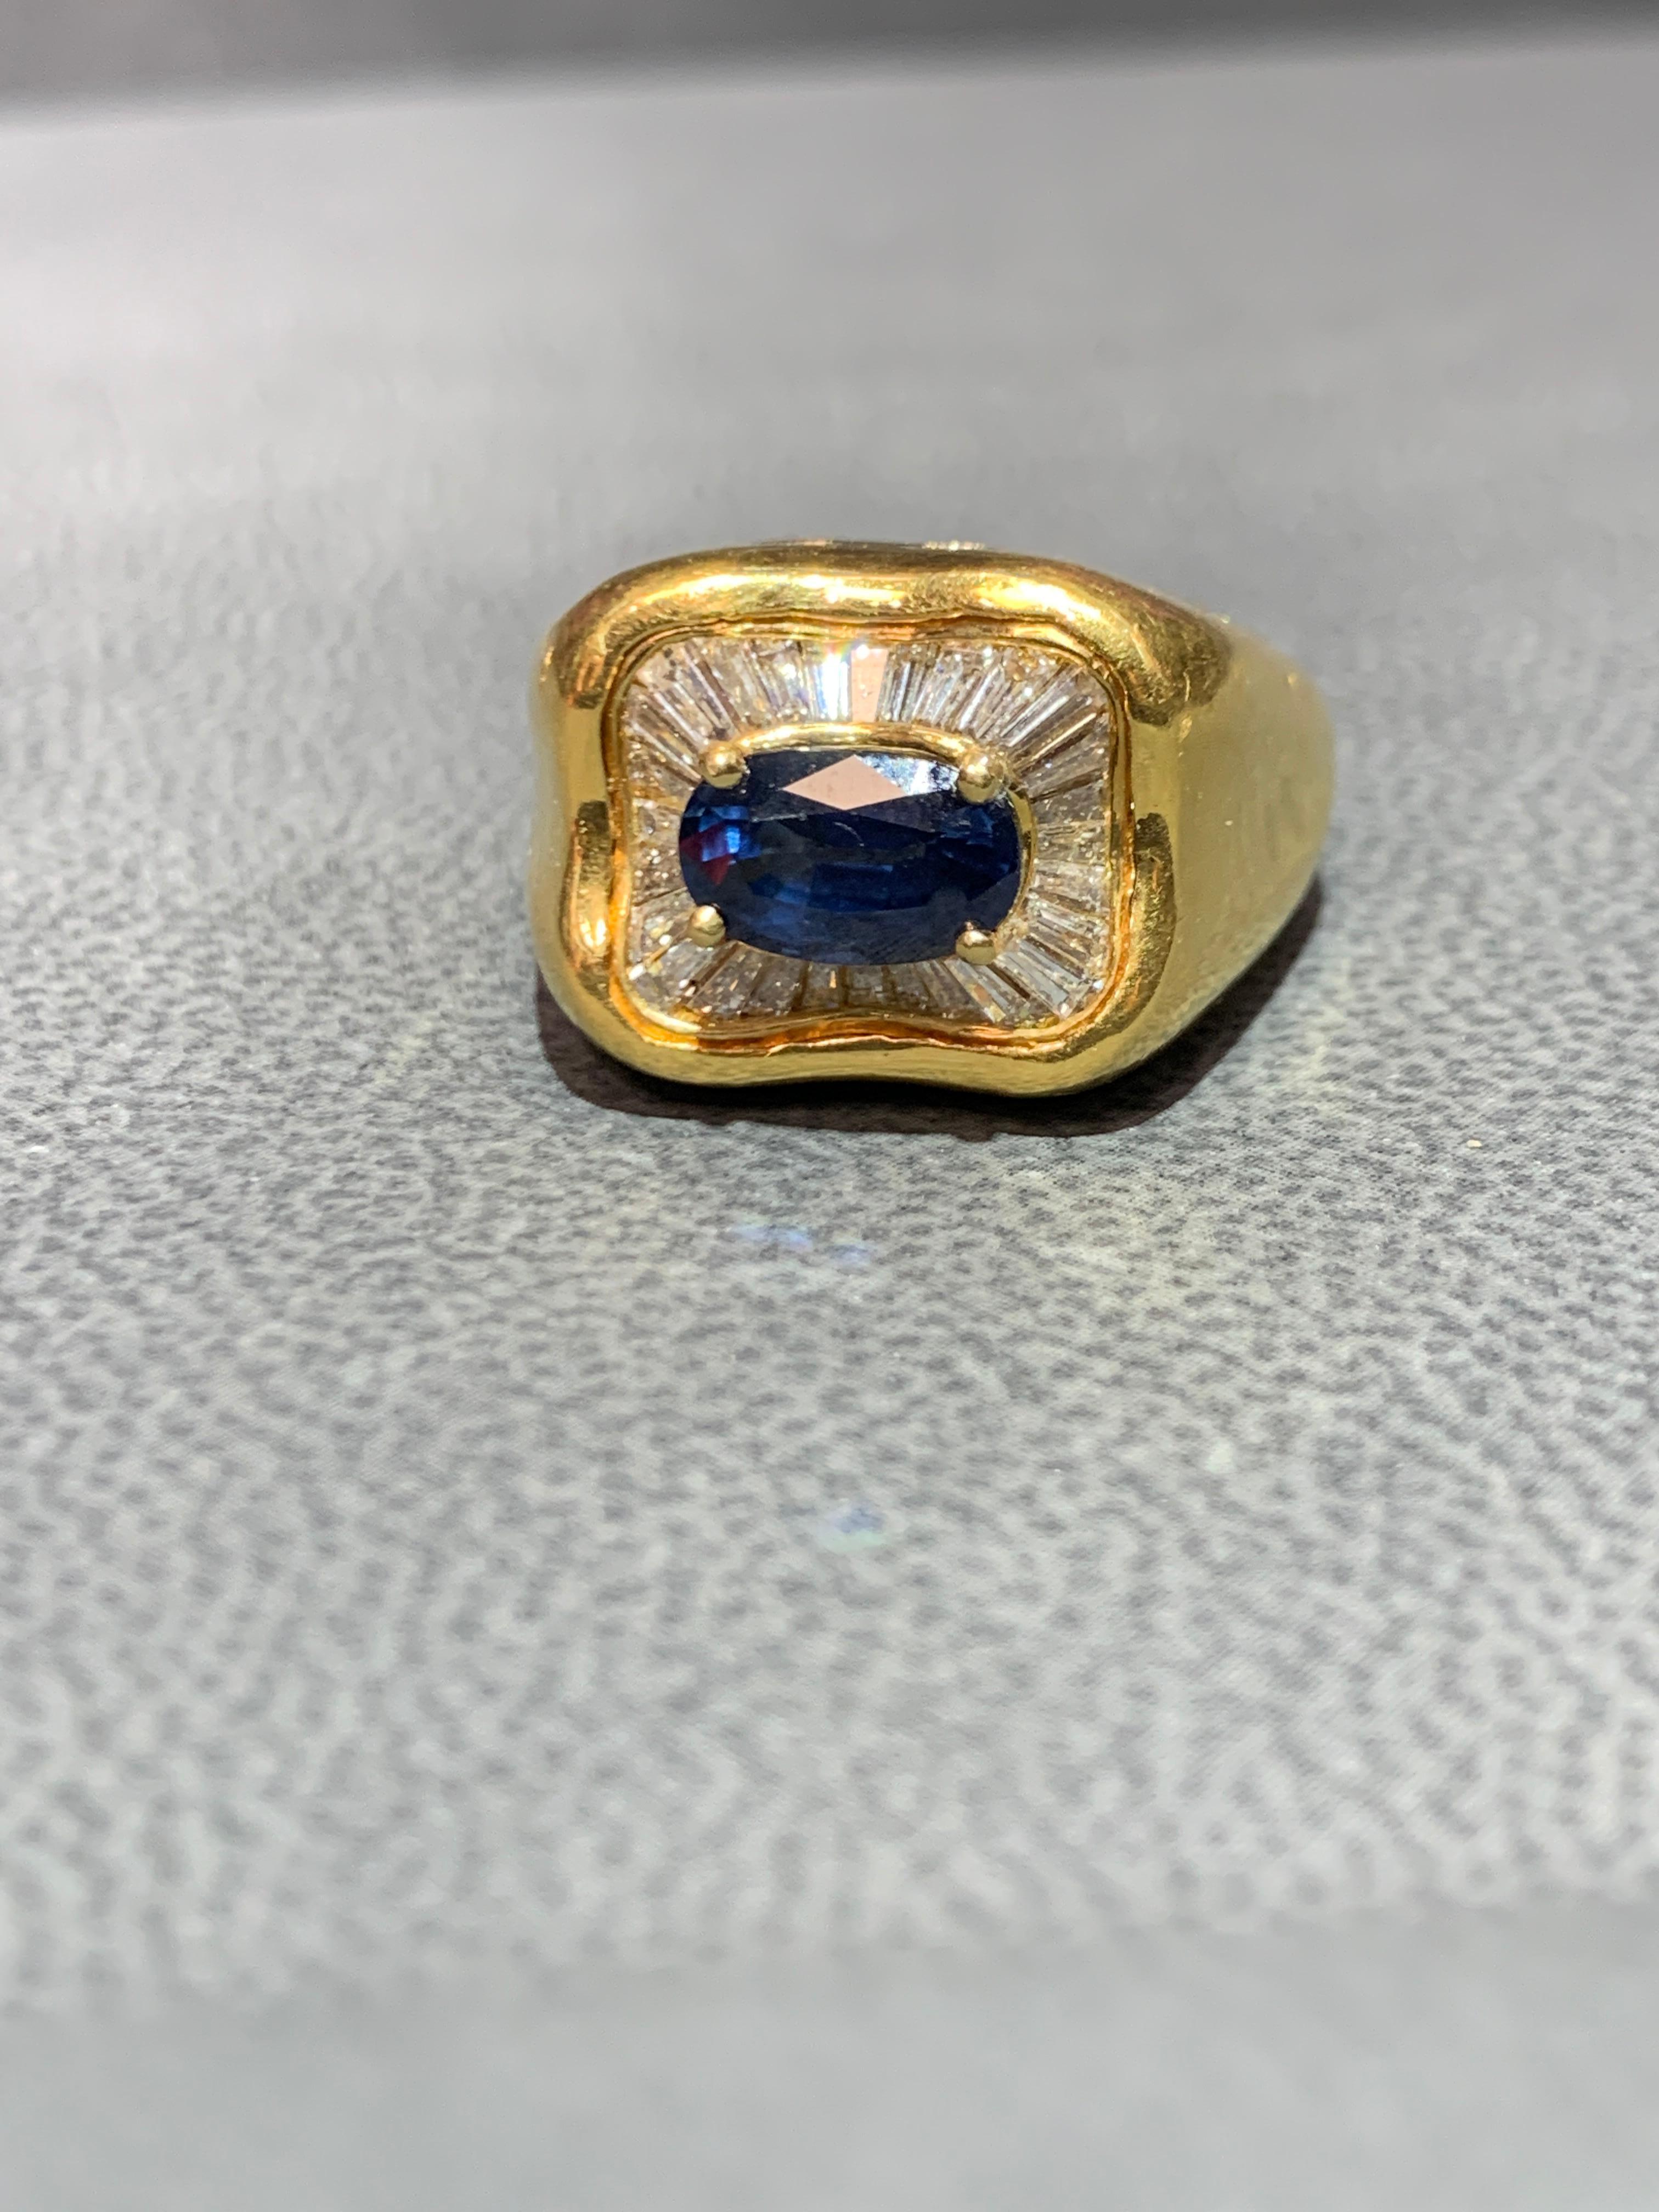 Sapphire & Diamond Yellow Gold  Men's Ring 
Sapphire Weight: 1.43 cts
Diamond Weight: 1.2 cts
Ring Size: 8.5
Re-sizable to any size free of charge 
Gram Weight: 21.6 grams 
14K Yellow Gold 